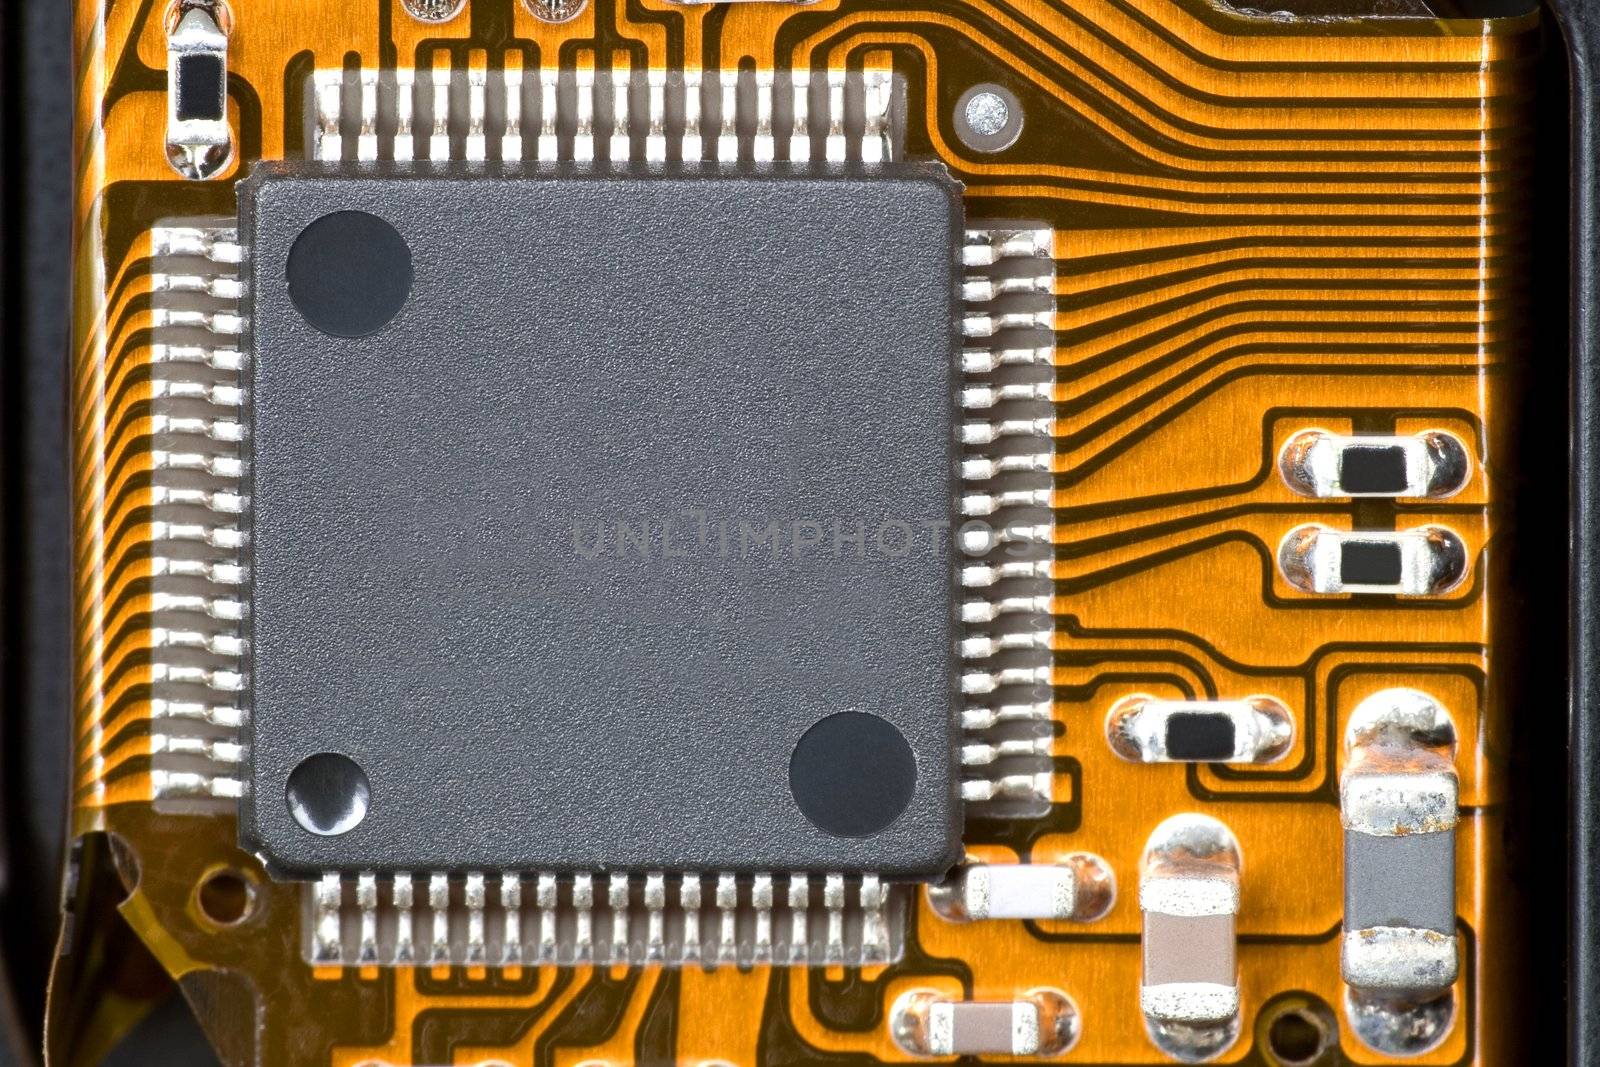 100mm macro image of a computer component.